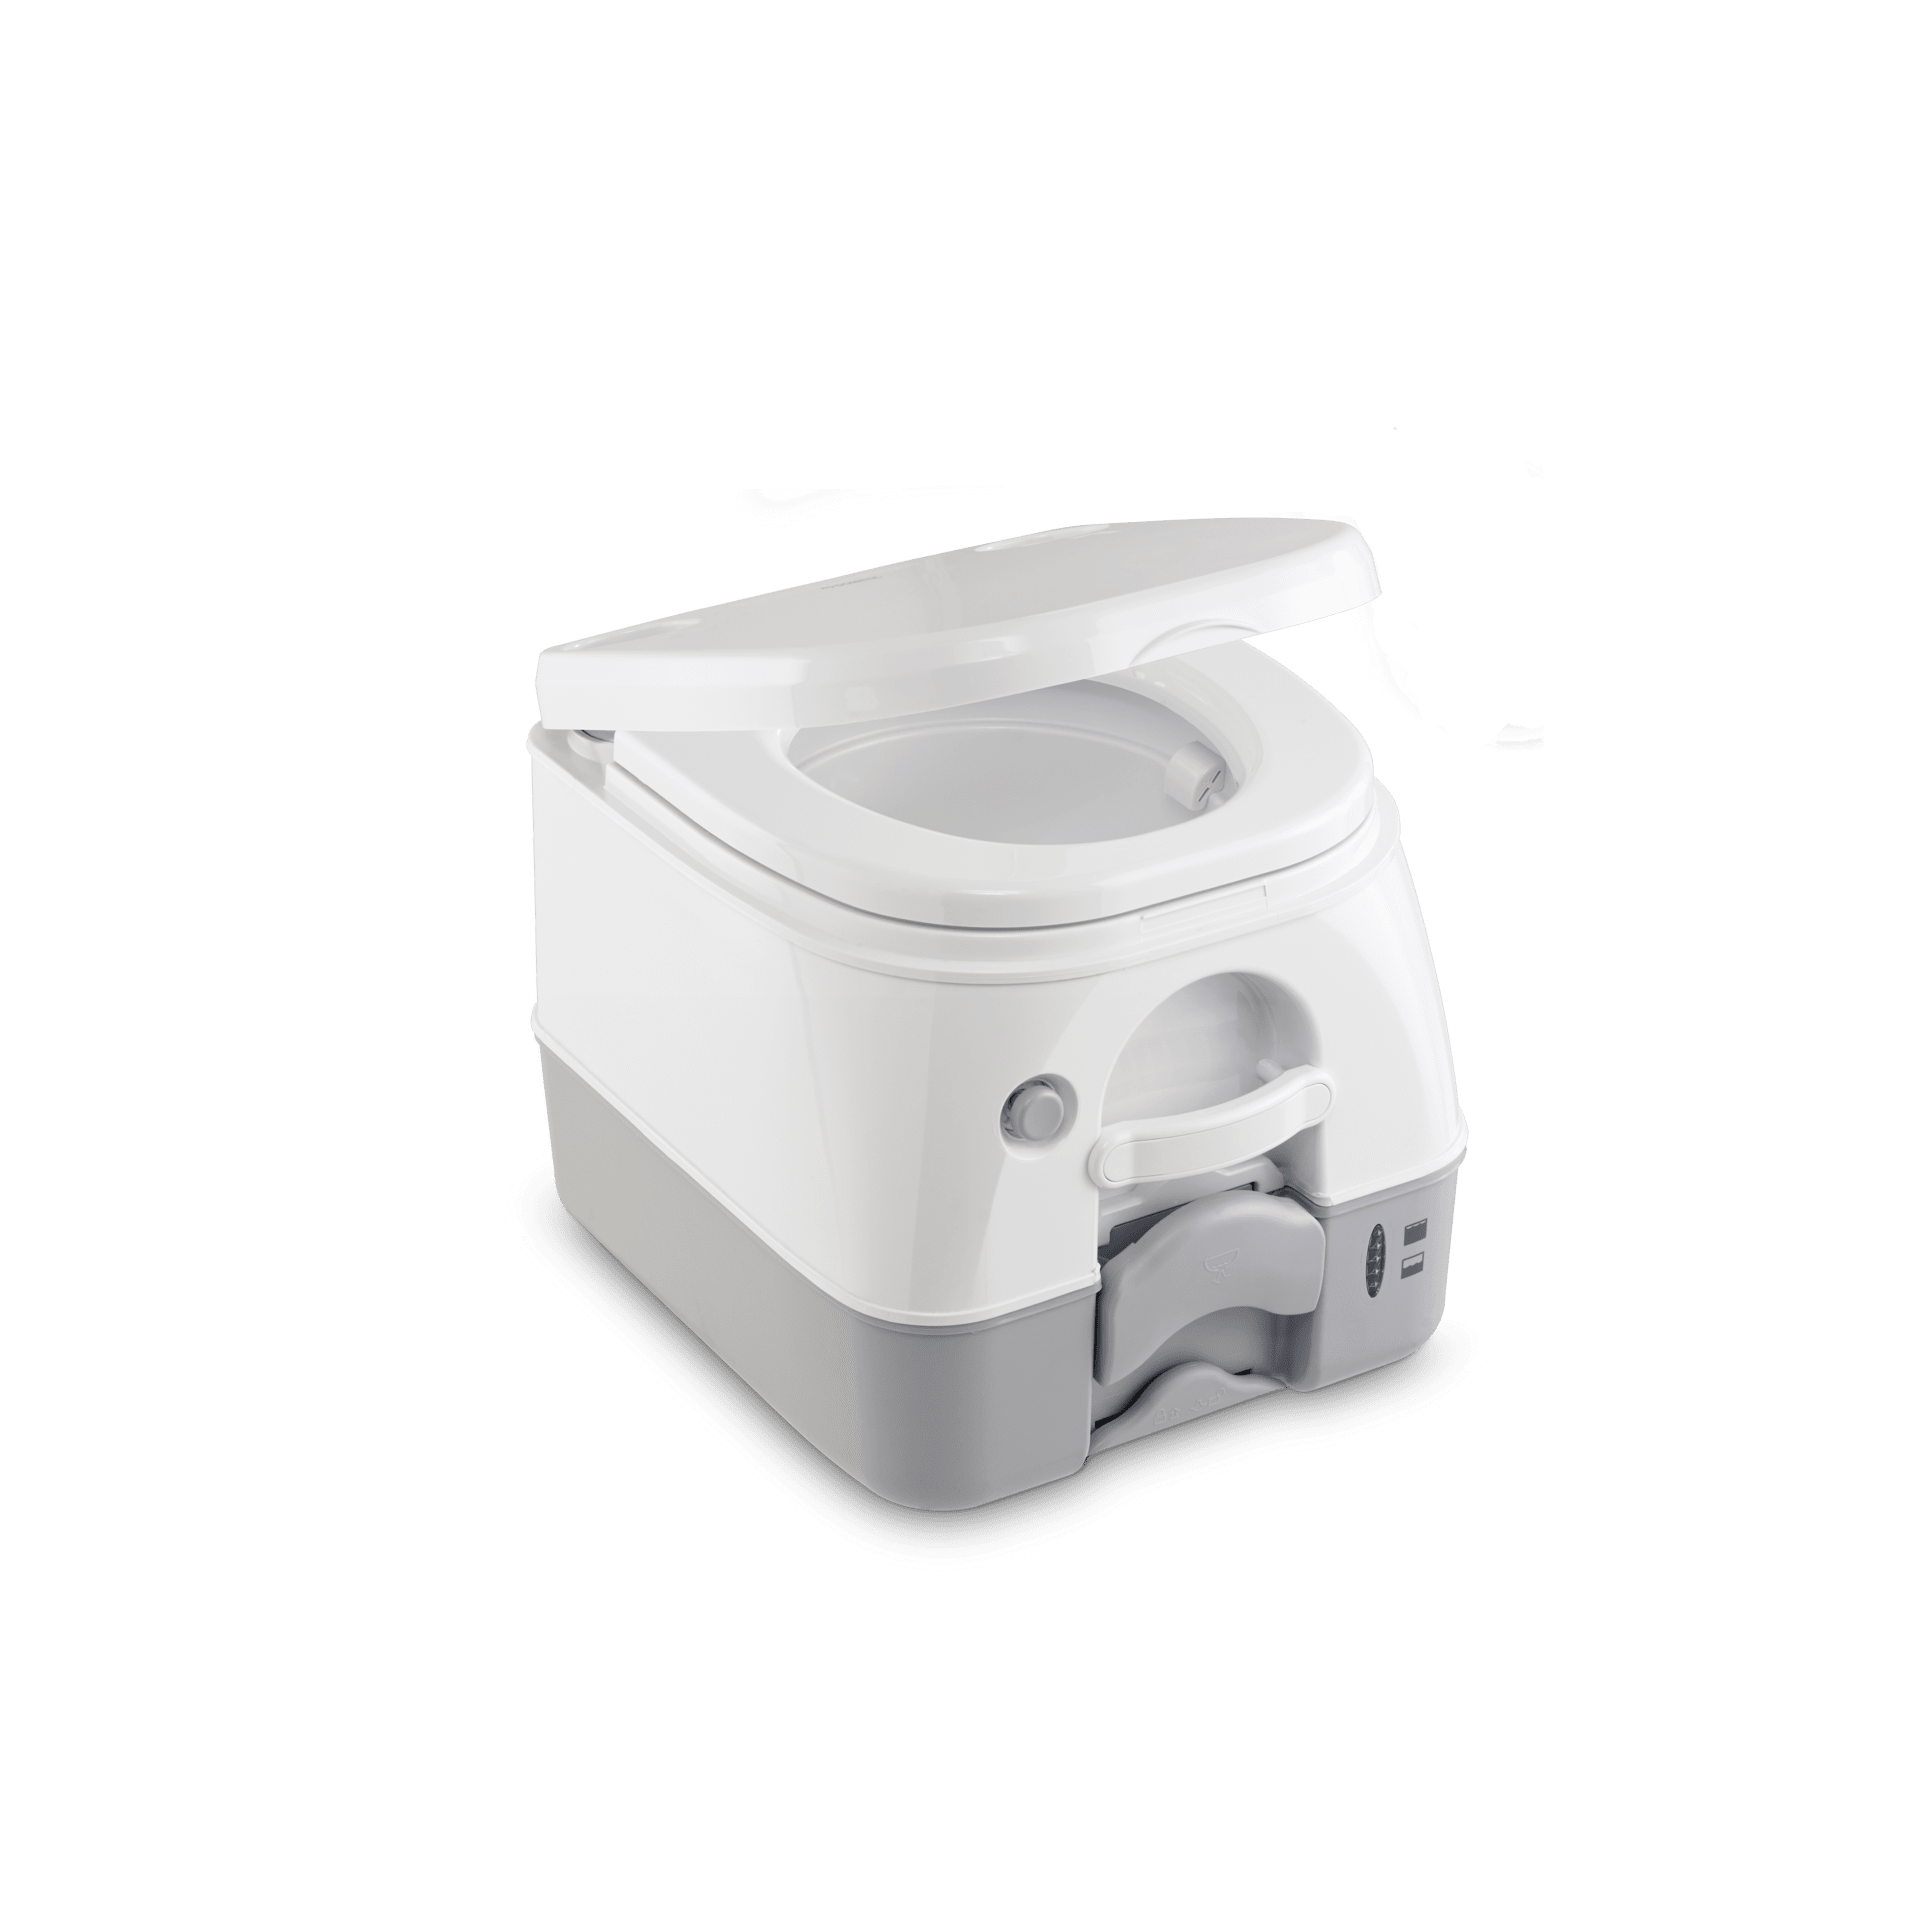 Dometic 972 Portable Toilet - Powerful Flushing at the touch of a